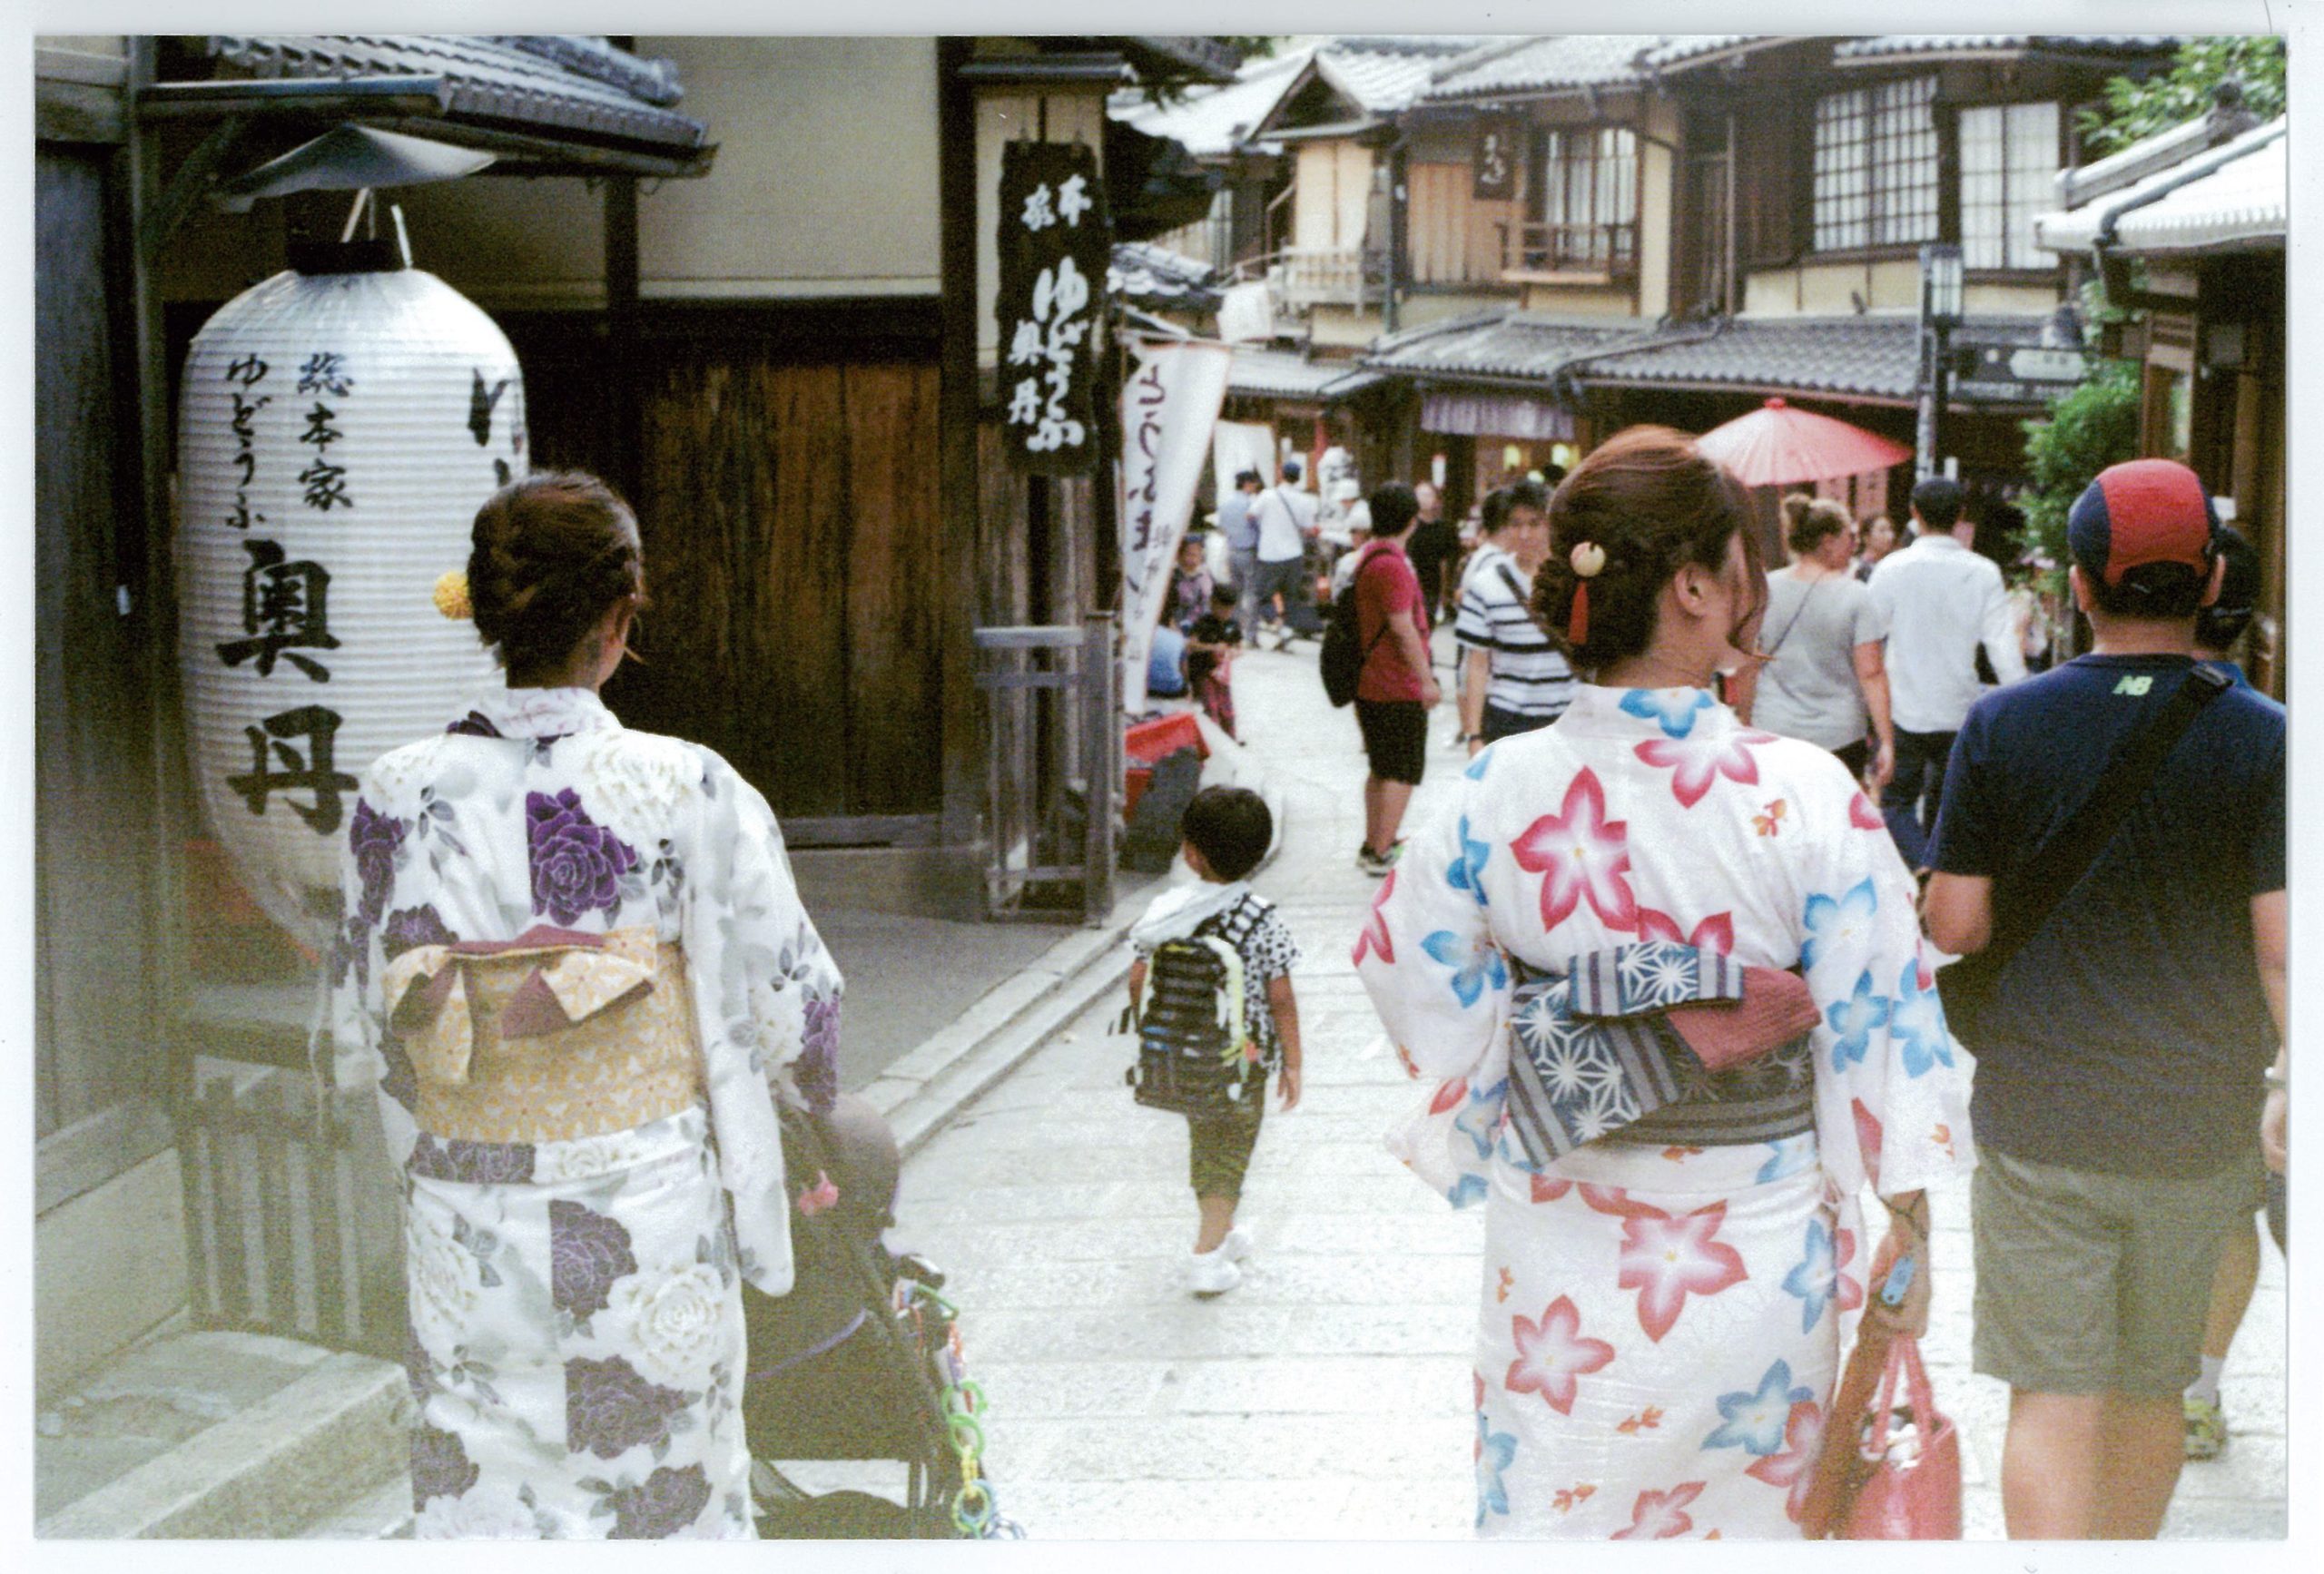 Two Japanese women in traditional clothing walk their children down a Kyoto street